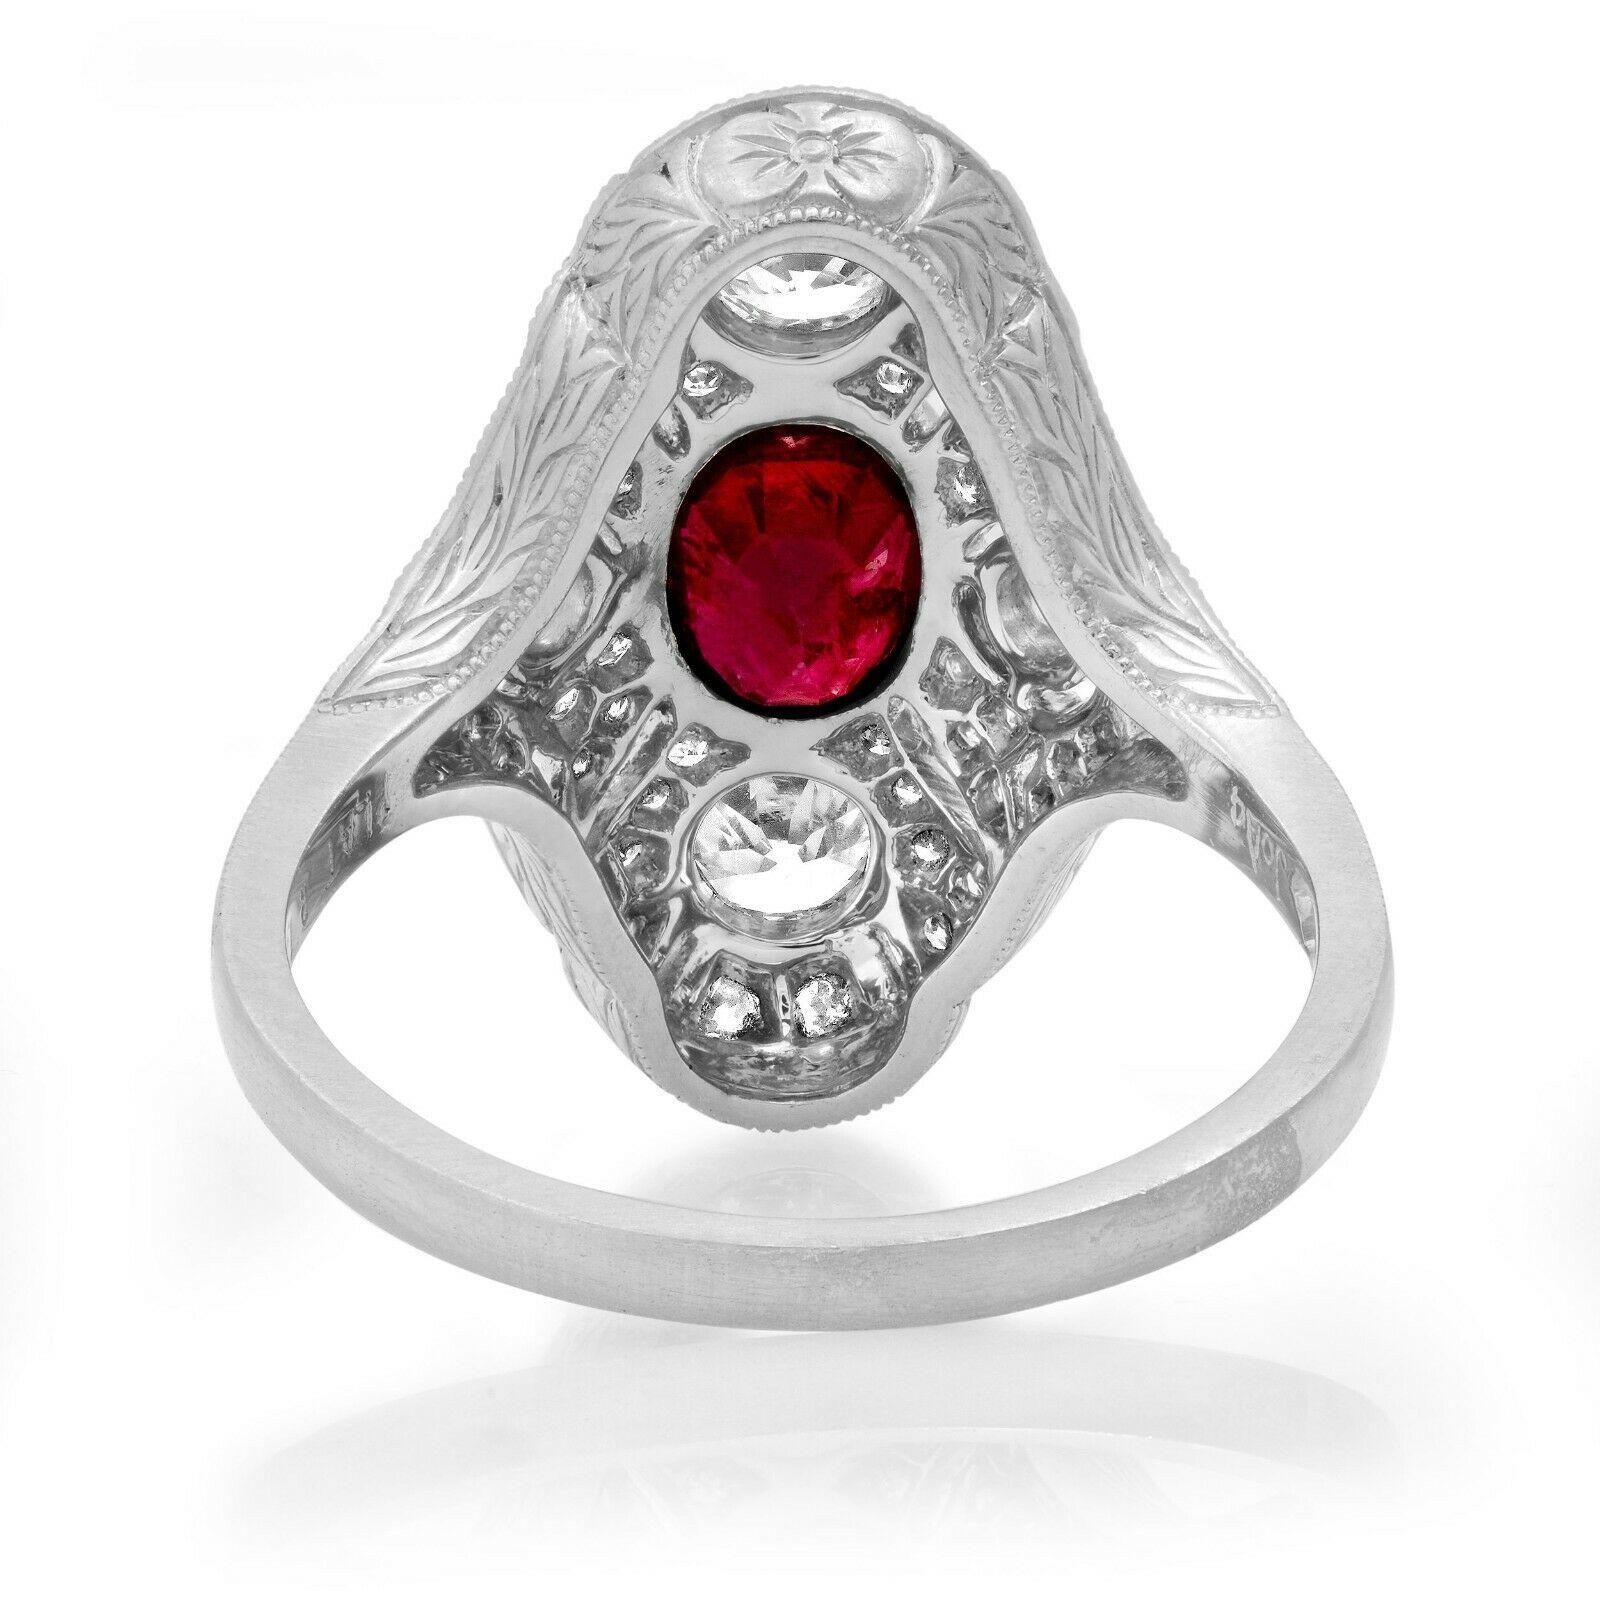 Ruby (1.28 total carat weight) and diamond (0.69 total carat weight) antique inspired cocktail ring in 900 platinum. The ring is designed and handmade locally in Los Angeles by Sage Designs L.A. using earth-mined and conflict free diamonds and